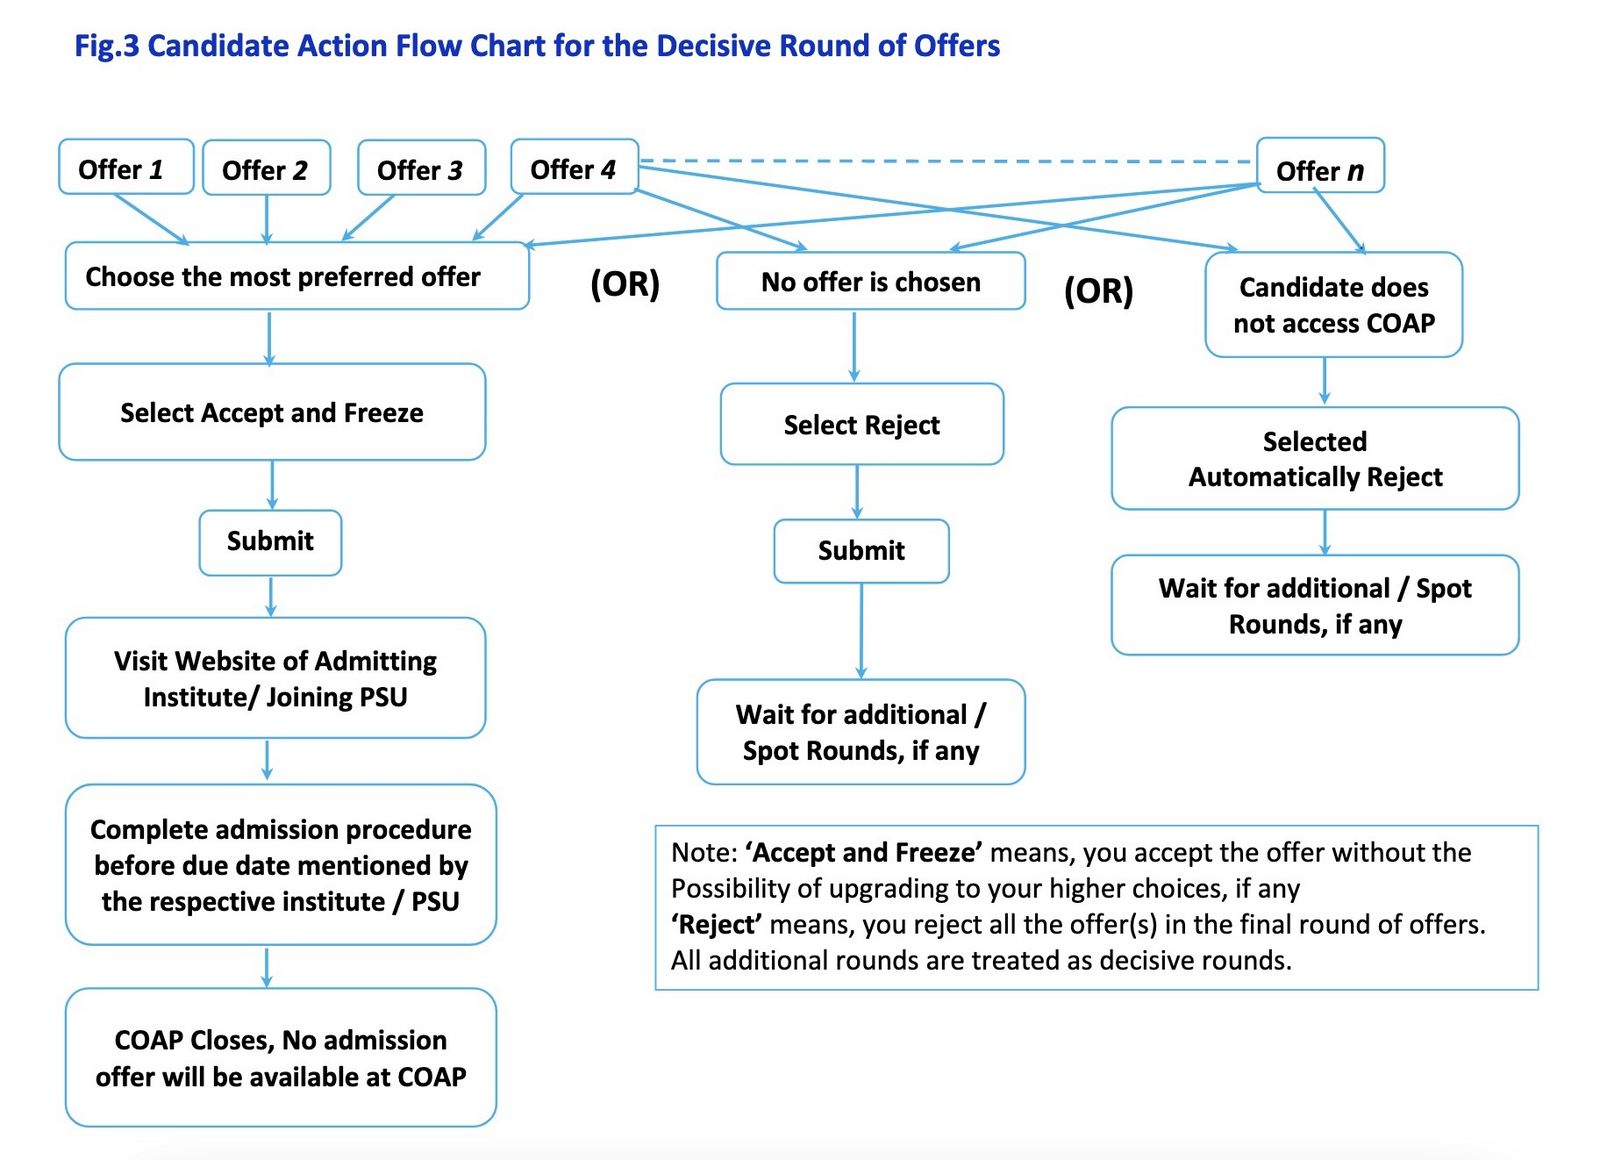 COAP 2022 Candidate Action Flow Chart for the Decisive Round of Offers